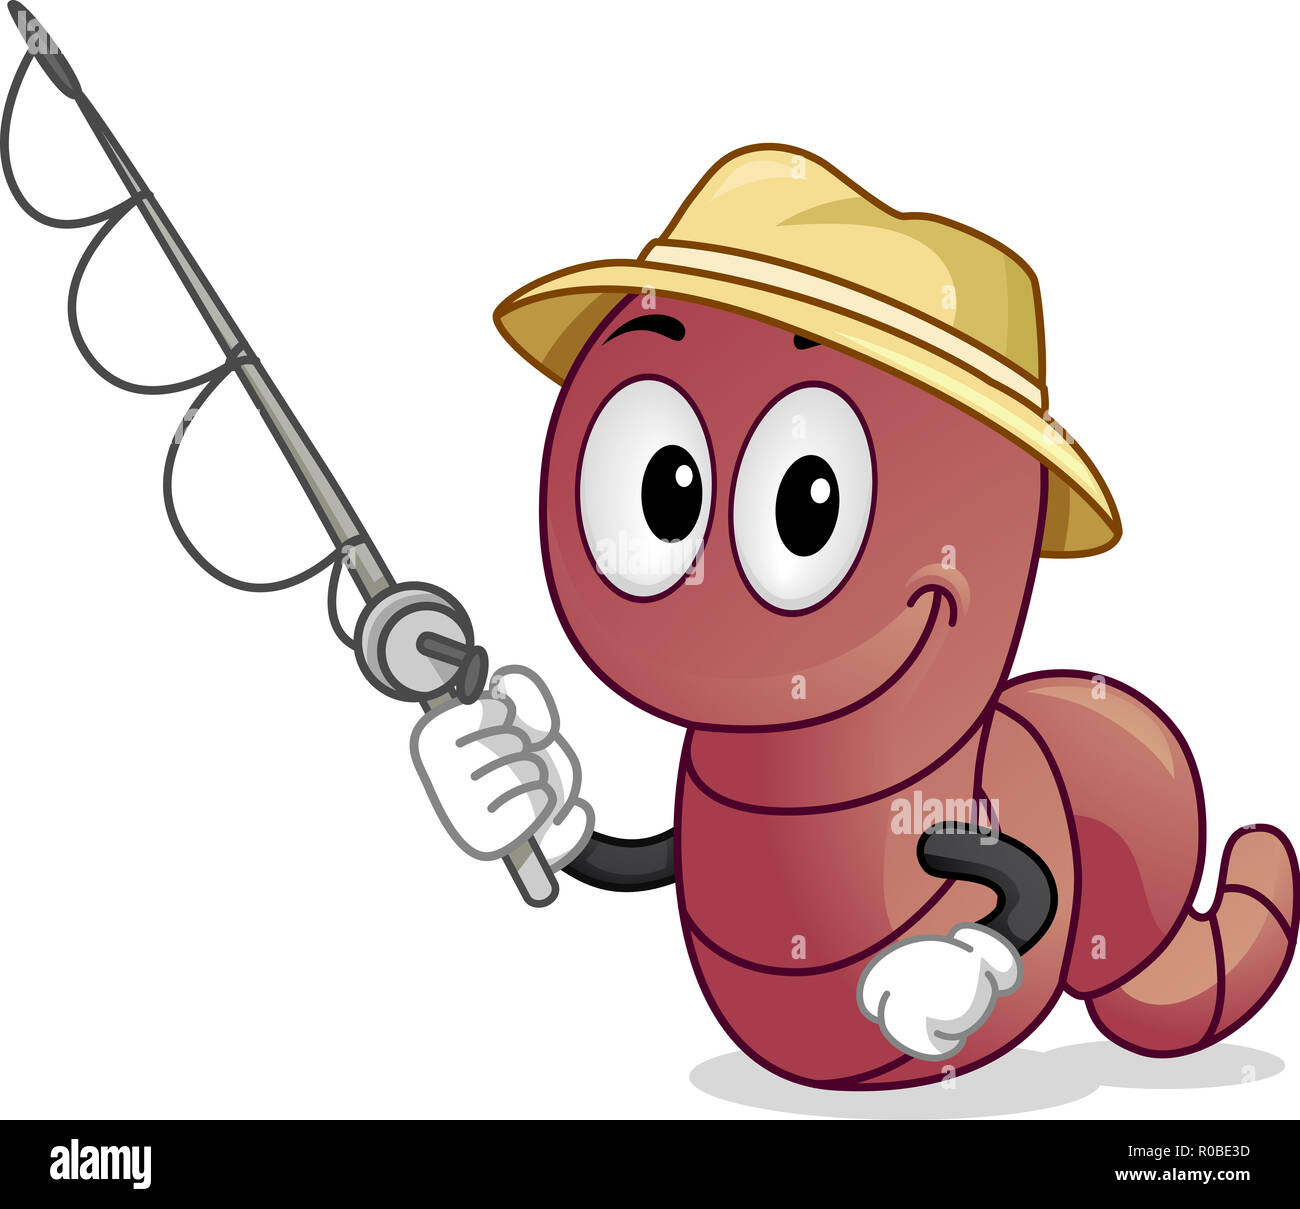 Illustration of a Worm Mascot Wearing a Hat and Holding a Fishing